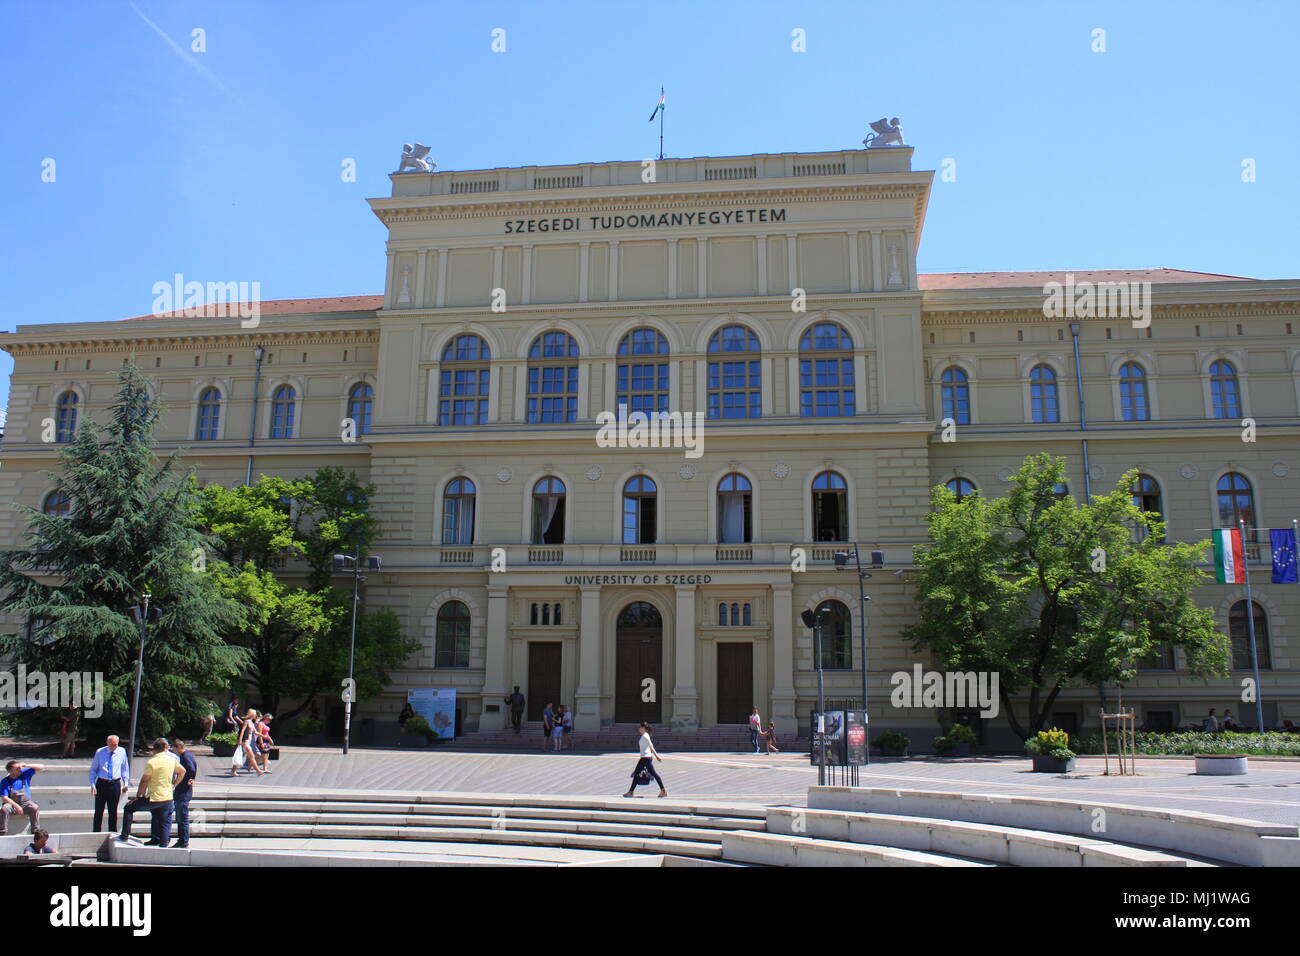 The University of Szeged, located on the Dugonich square. Stock Photo